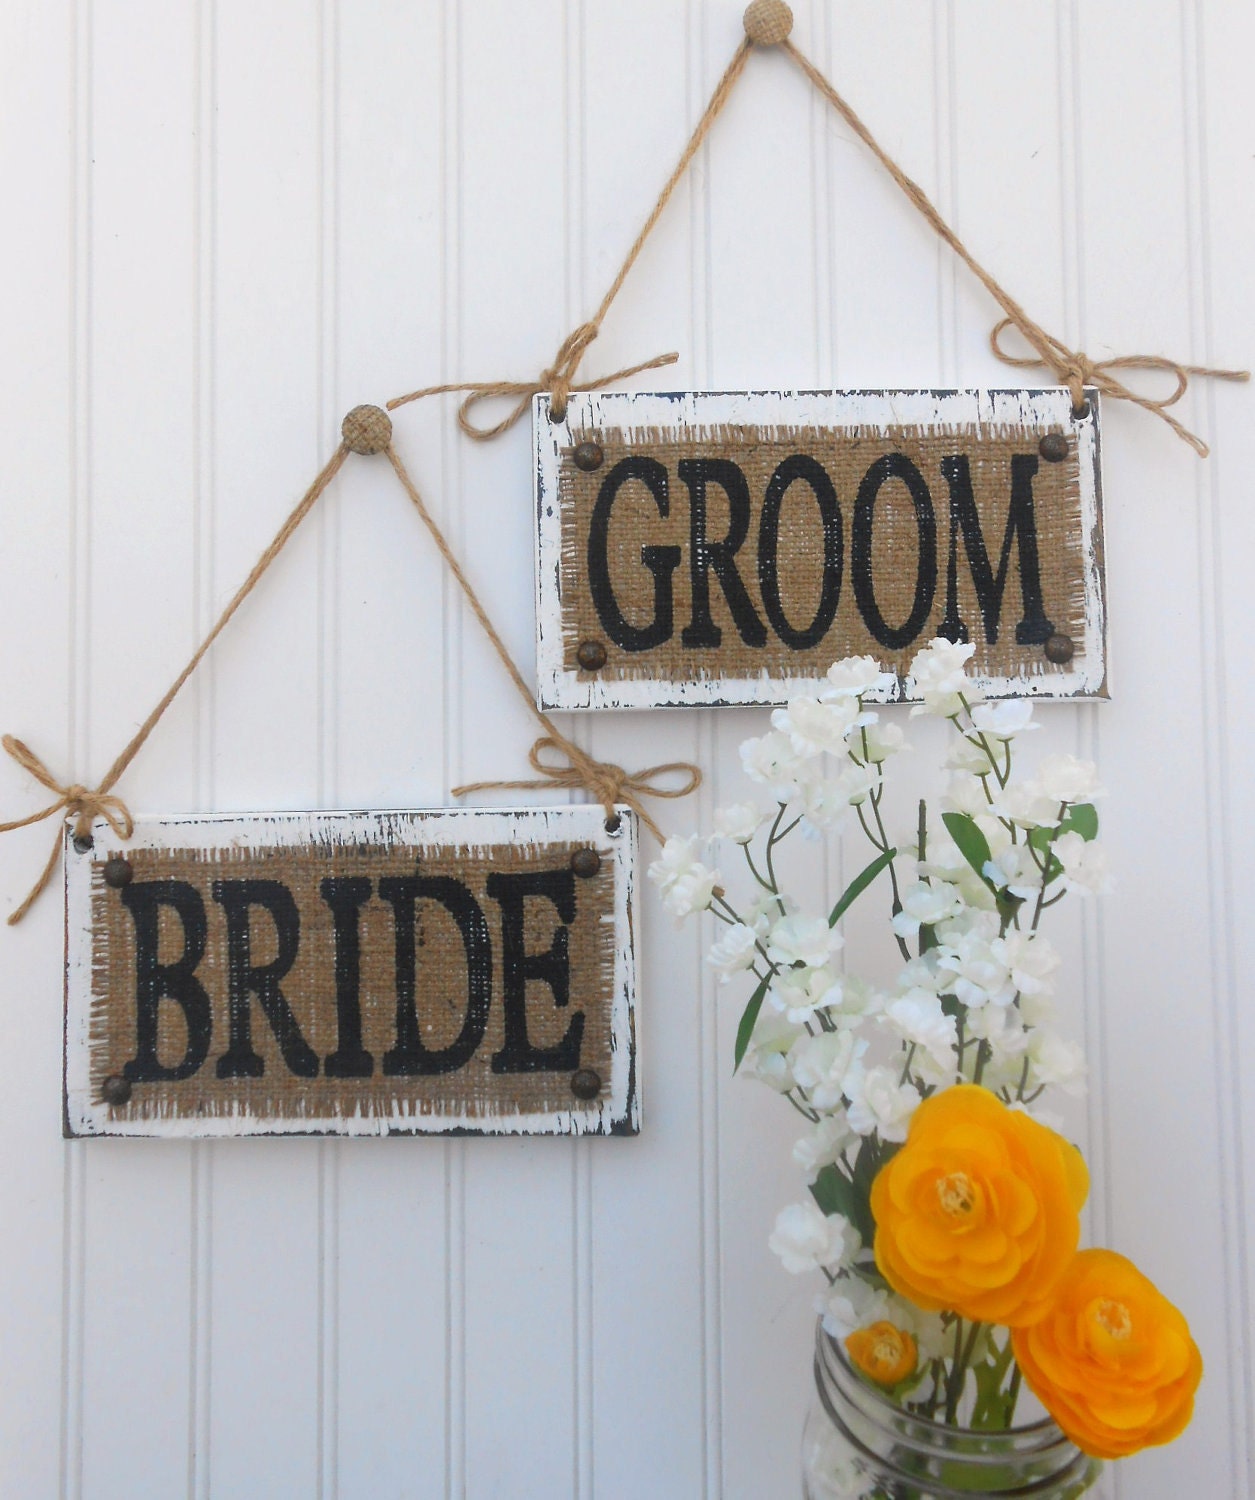 Bride and Groom WEDDING Hanging Signs Chair wedding reception table chair 